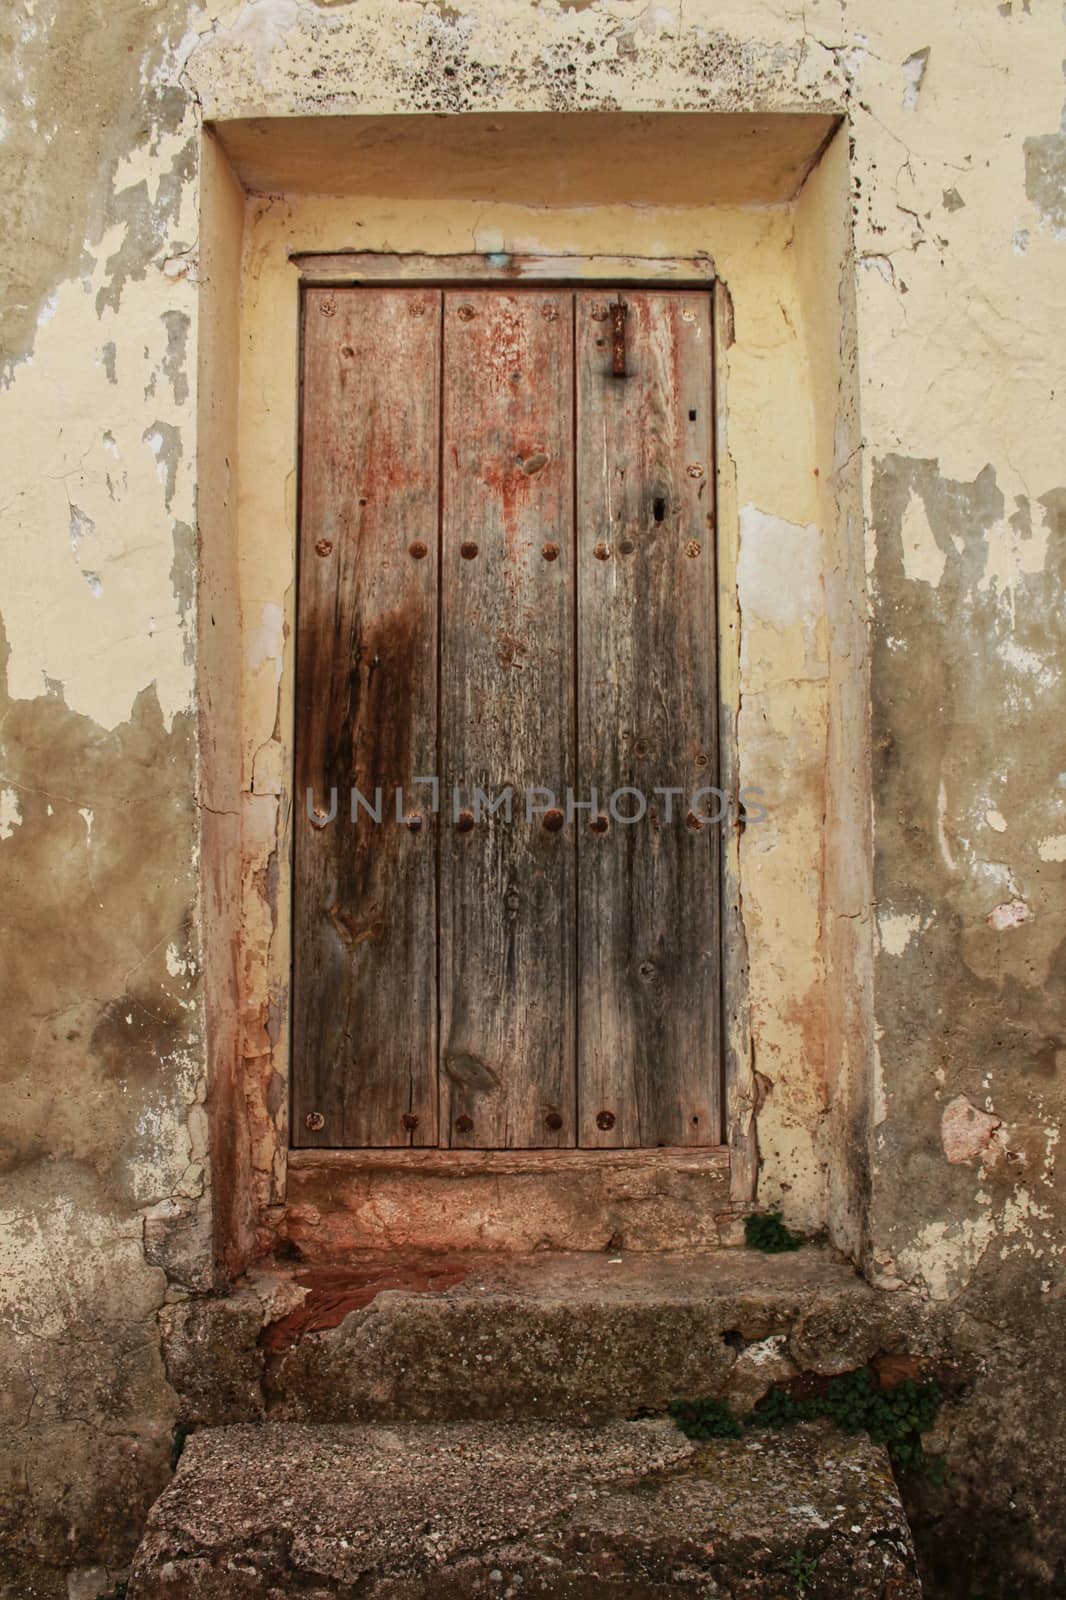 Old wooden door with wrought iron details by soniabonet